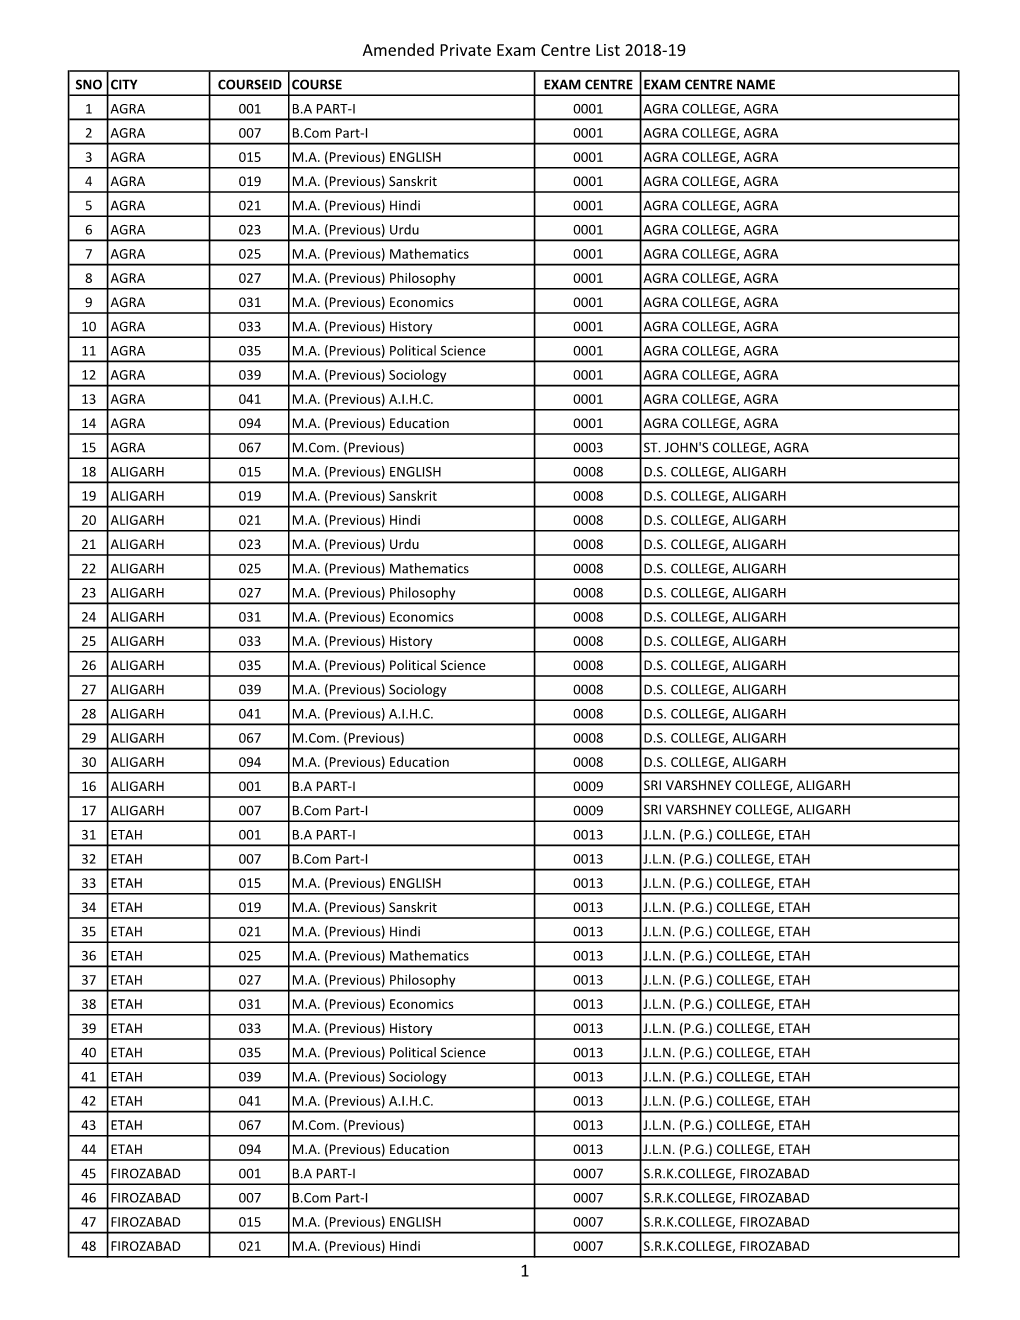 Amended Private Exam Centre List 2018-19 1